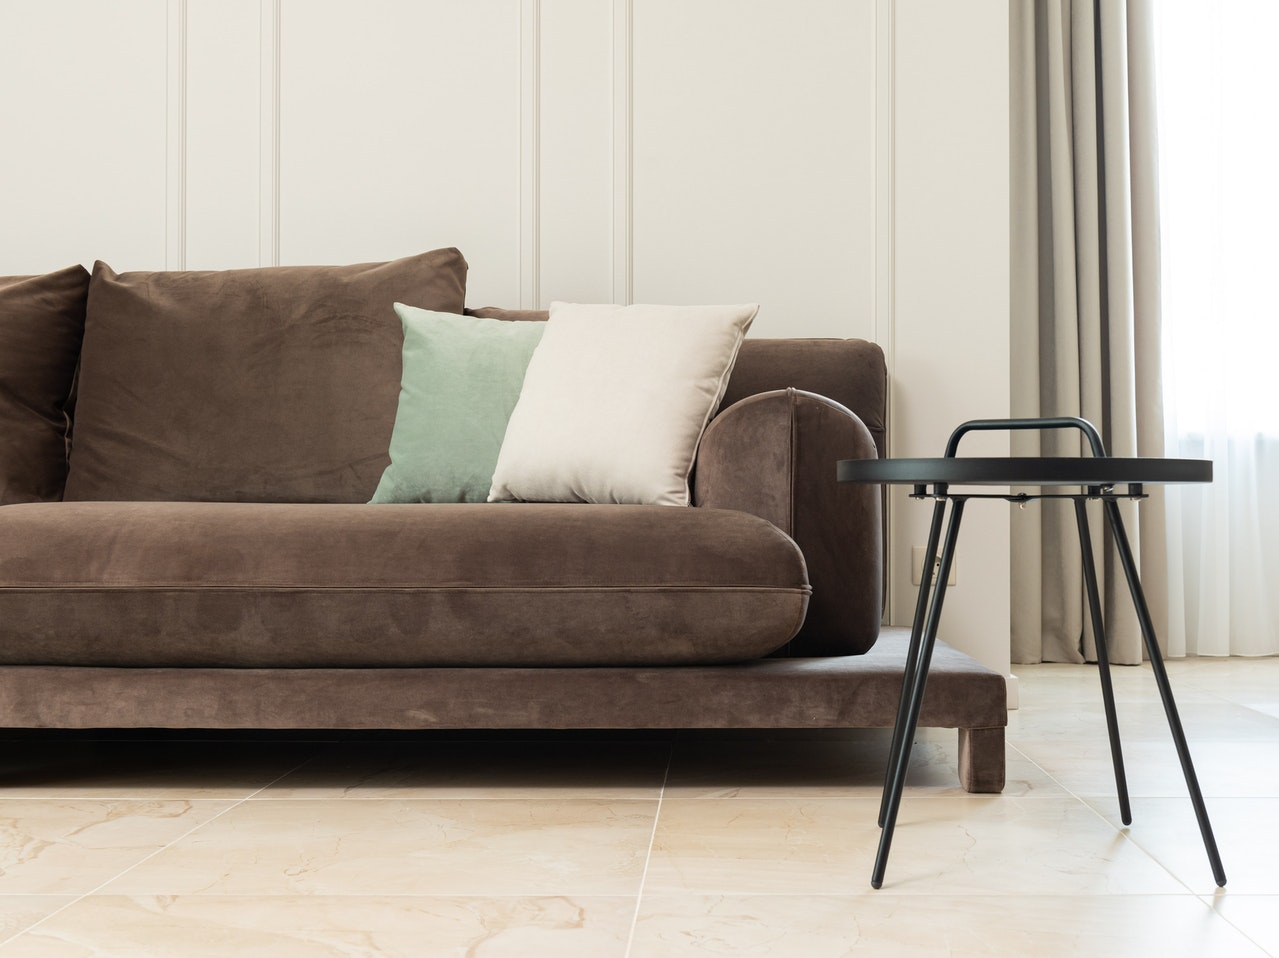 Brown sofa with white and green cushions